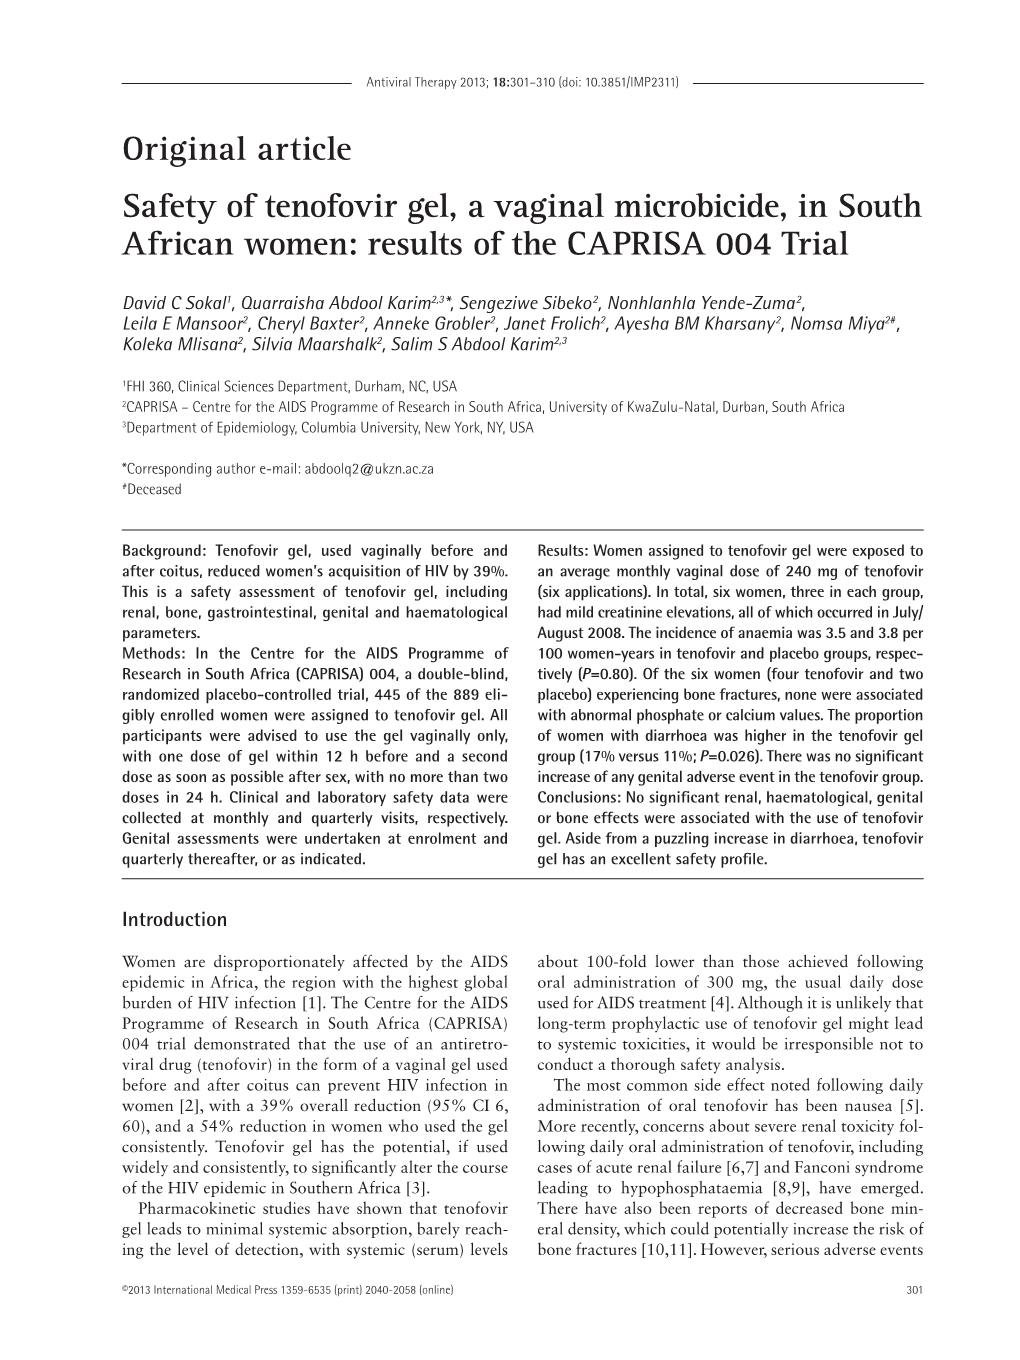 Original Article Safety of Tenofovir Gel, a Vaginal Microbicide, in South African Women: Results of the CAPRISA 004 Trial